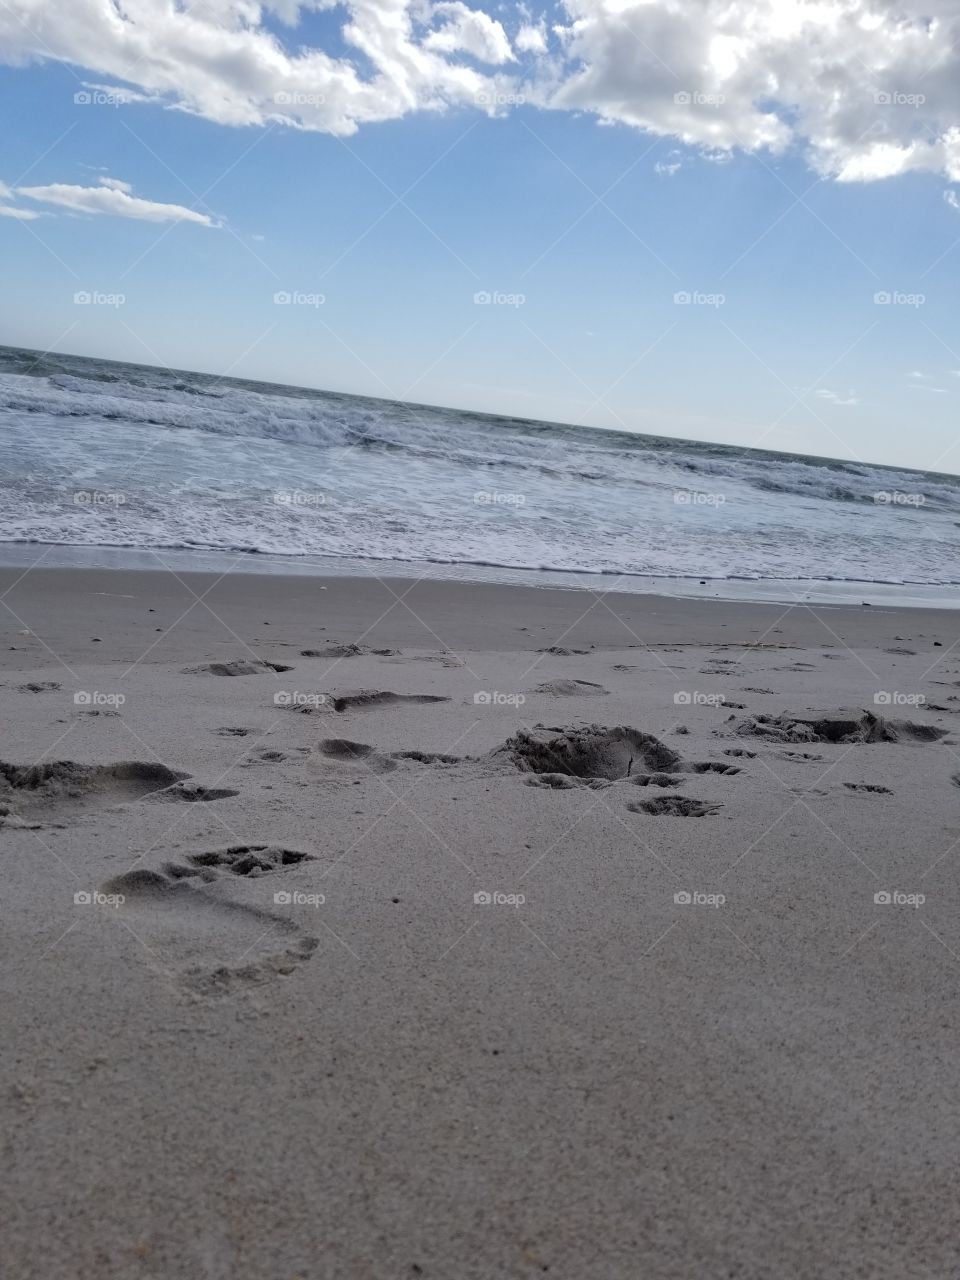 foot prints and beach